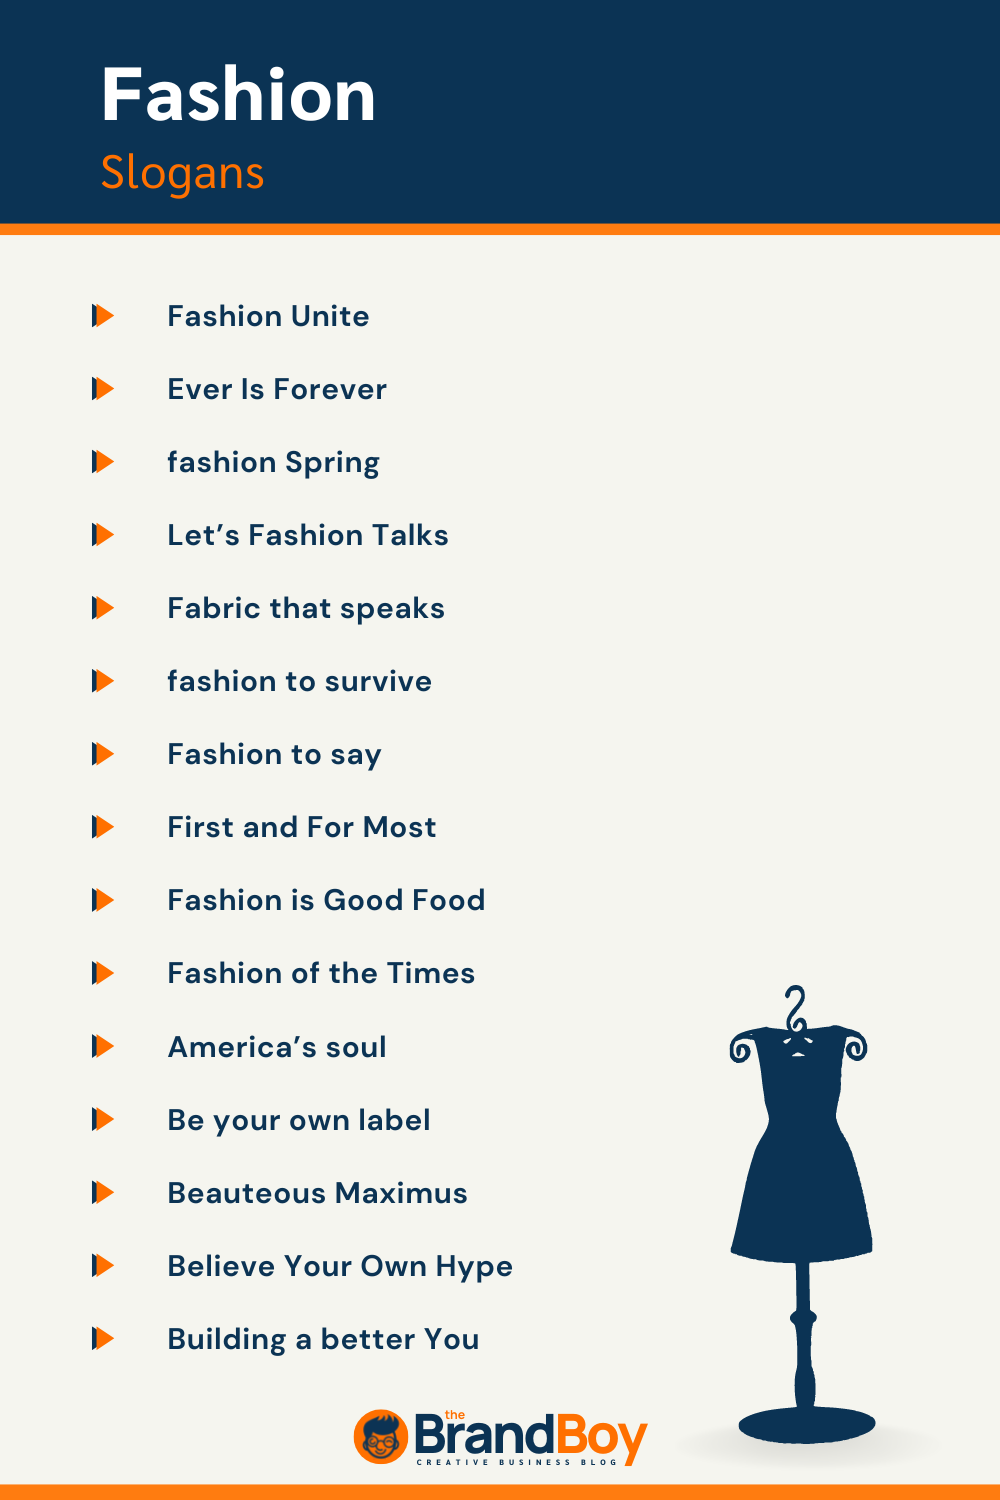 999+ Cool Fashion Slogans And Taglines (Generator + Guide)